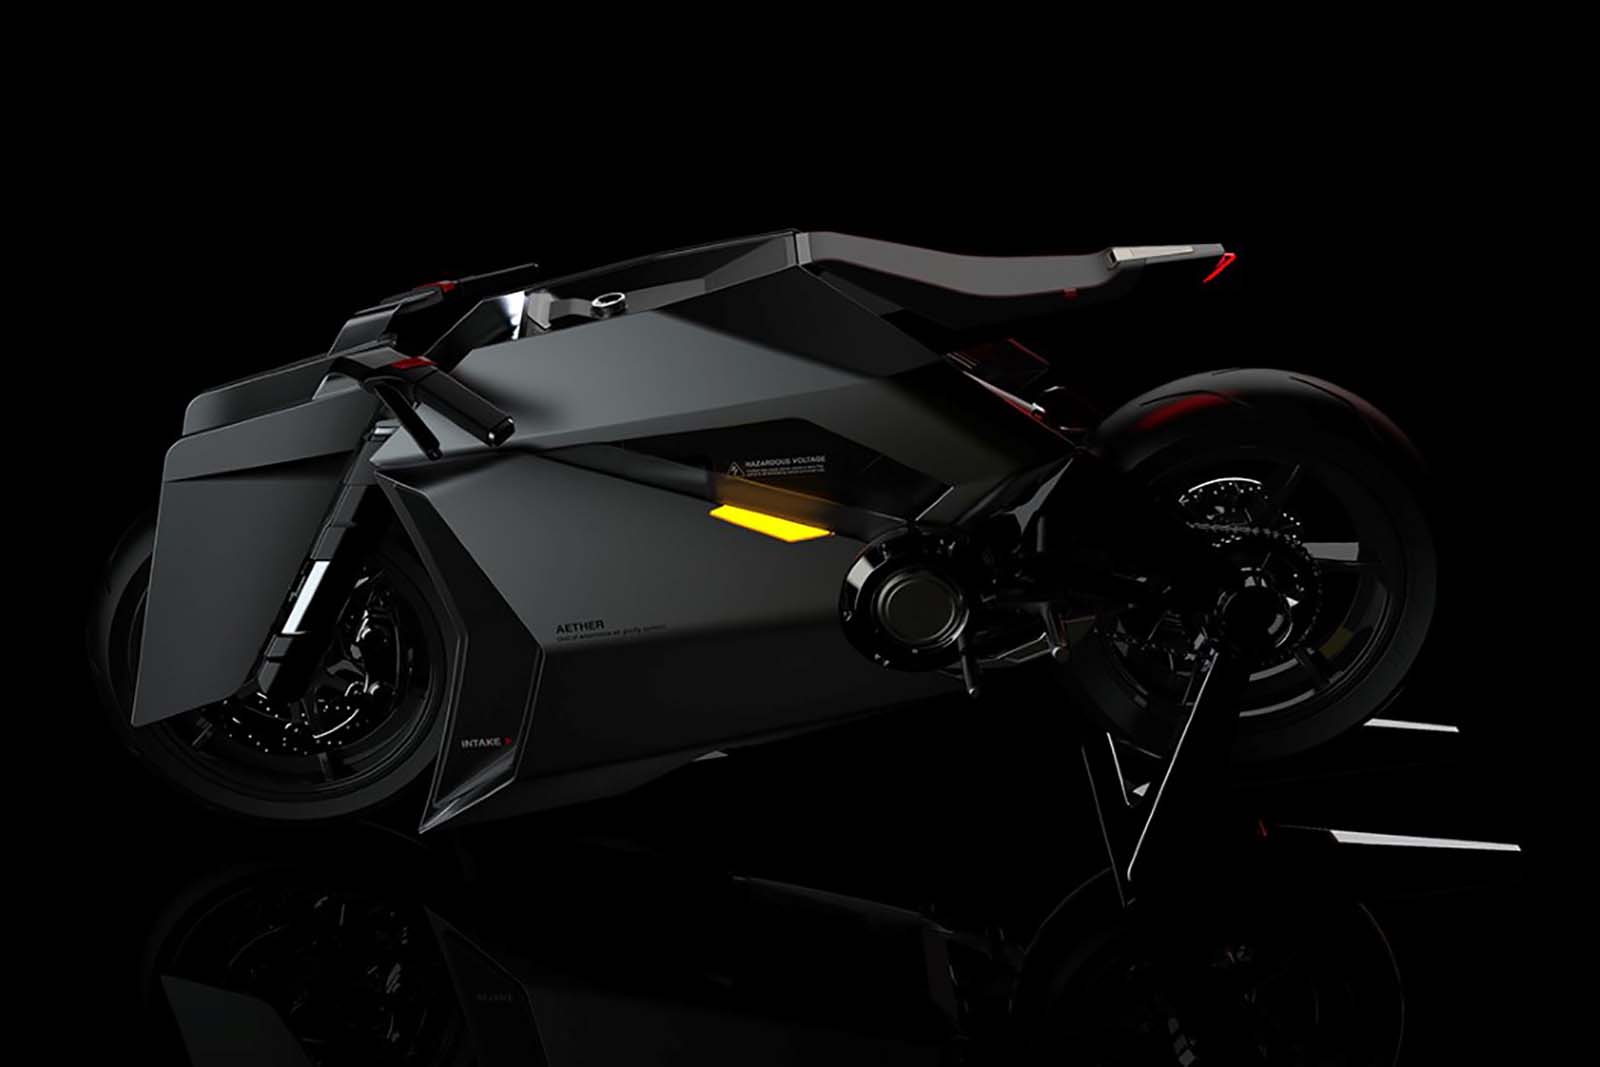 An Electric Motorcycle Concept That Cleans the Air While You Ride